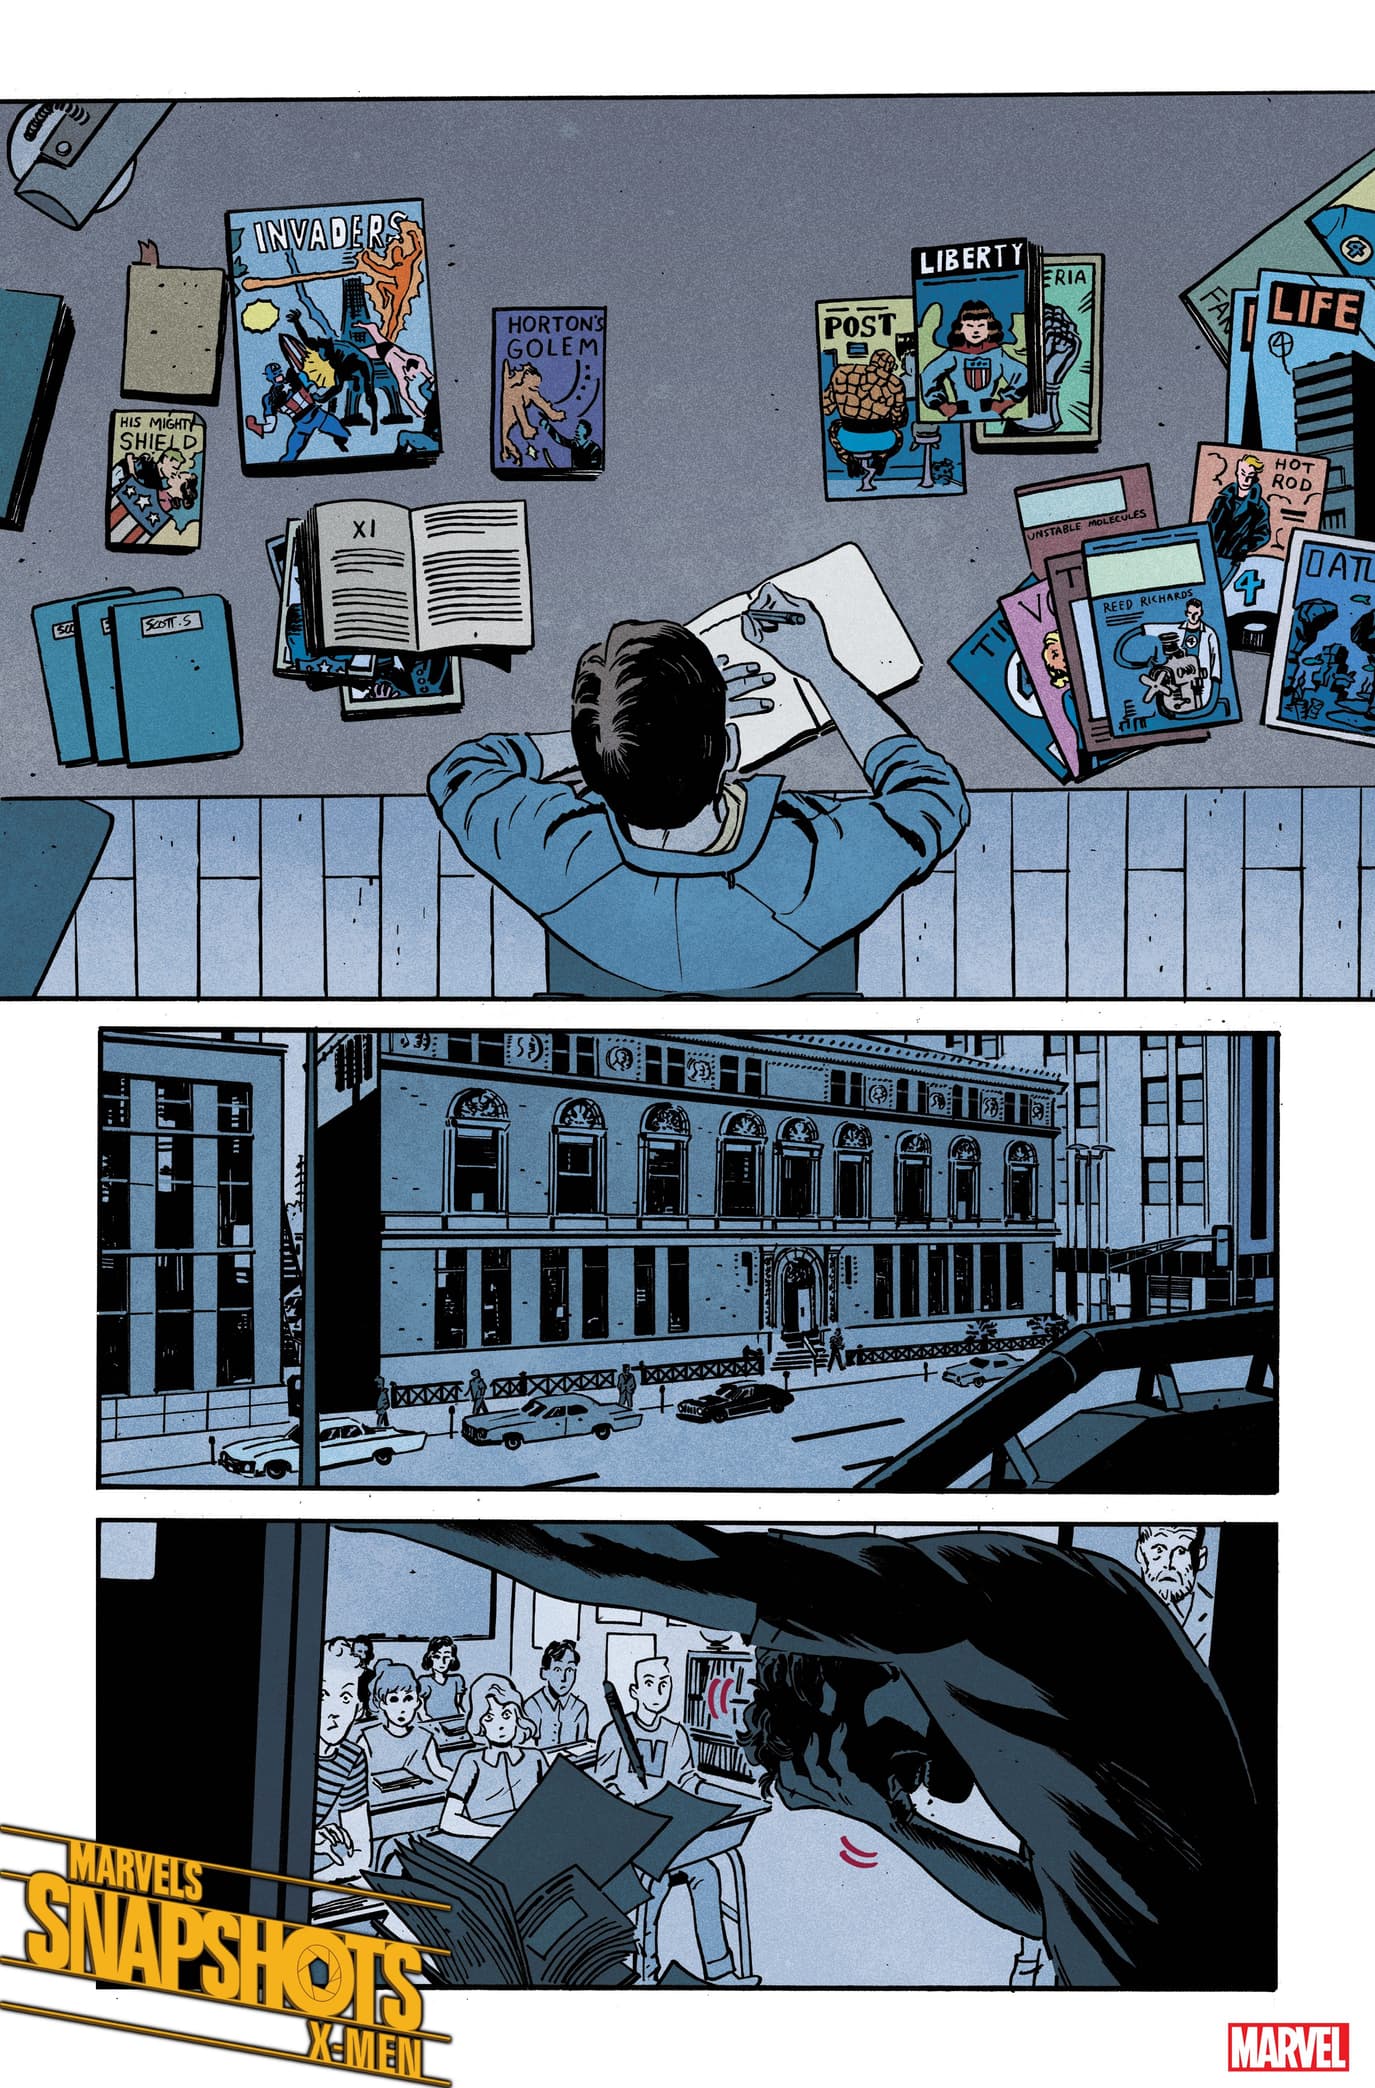 X-MEN: MARVELS SNAPSHOTS #1 preview pages by Tom Reilly with colors by Chris O'Halloran